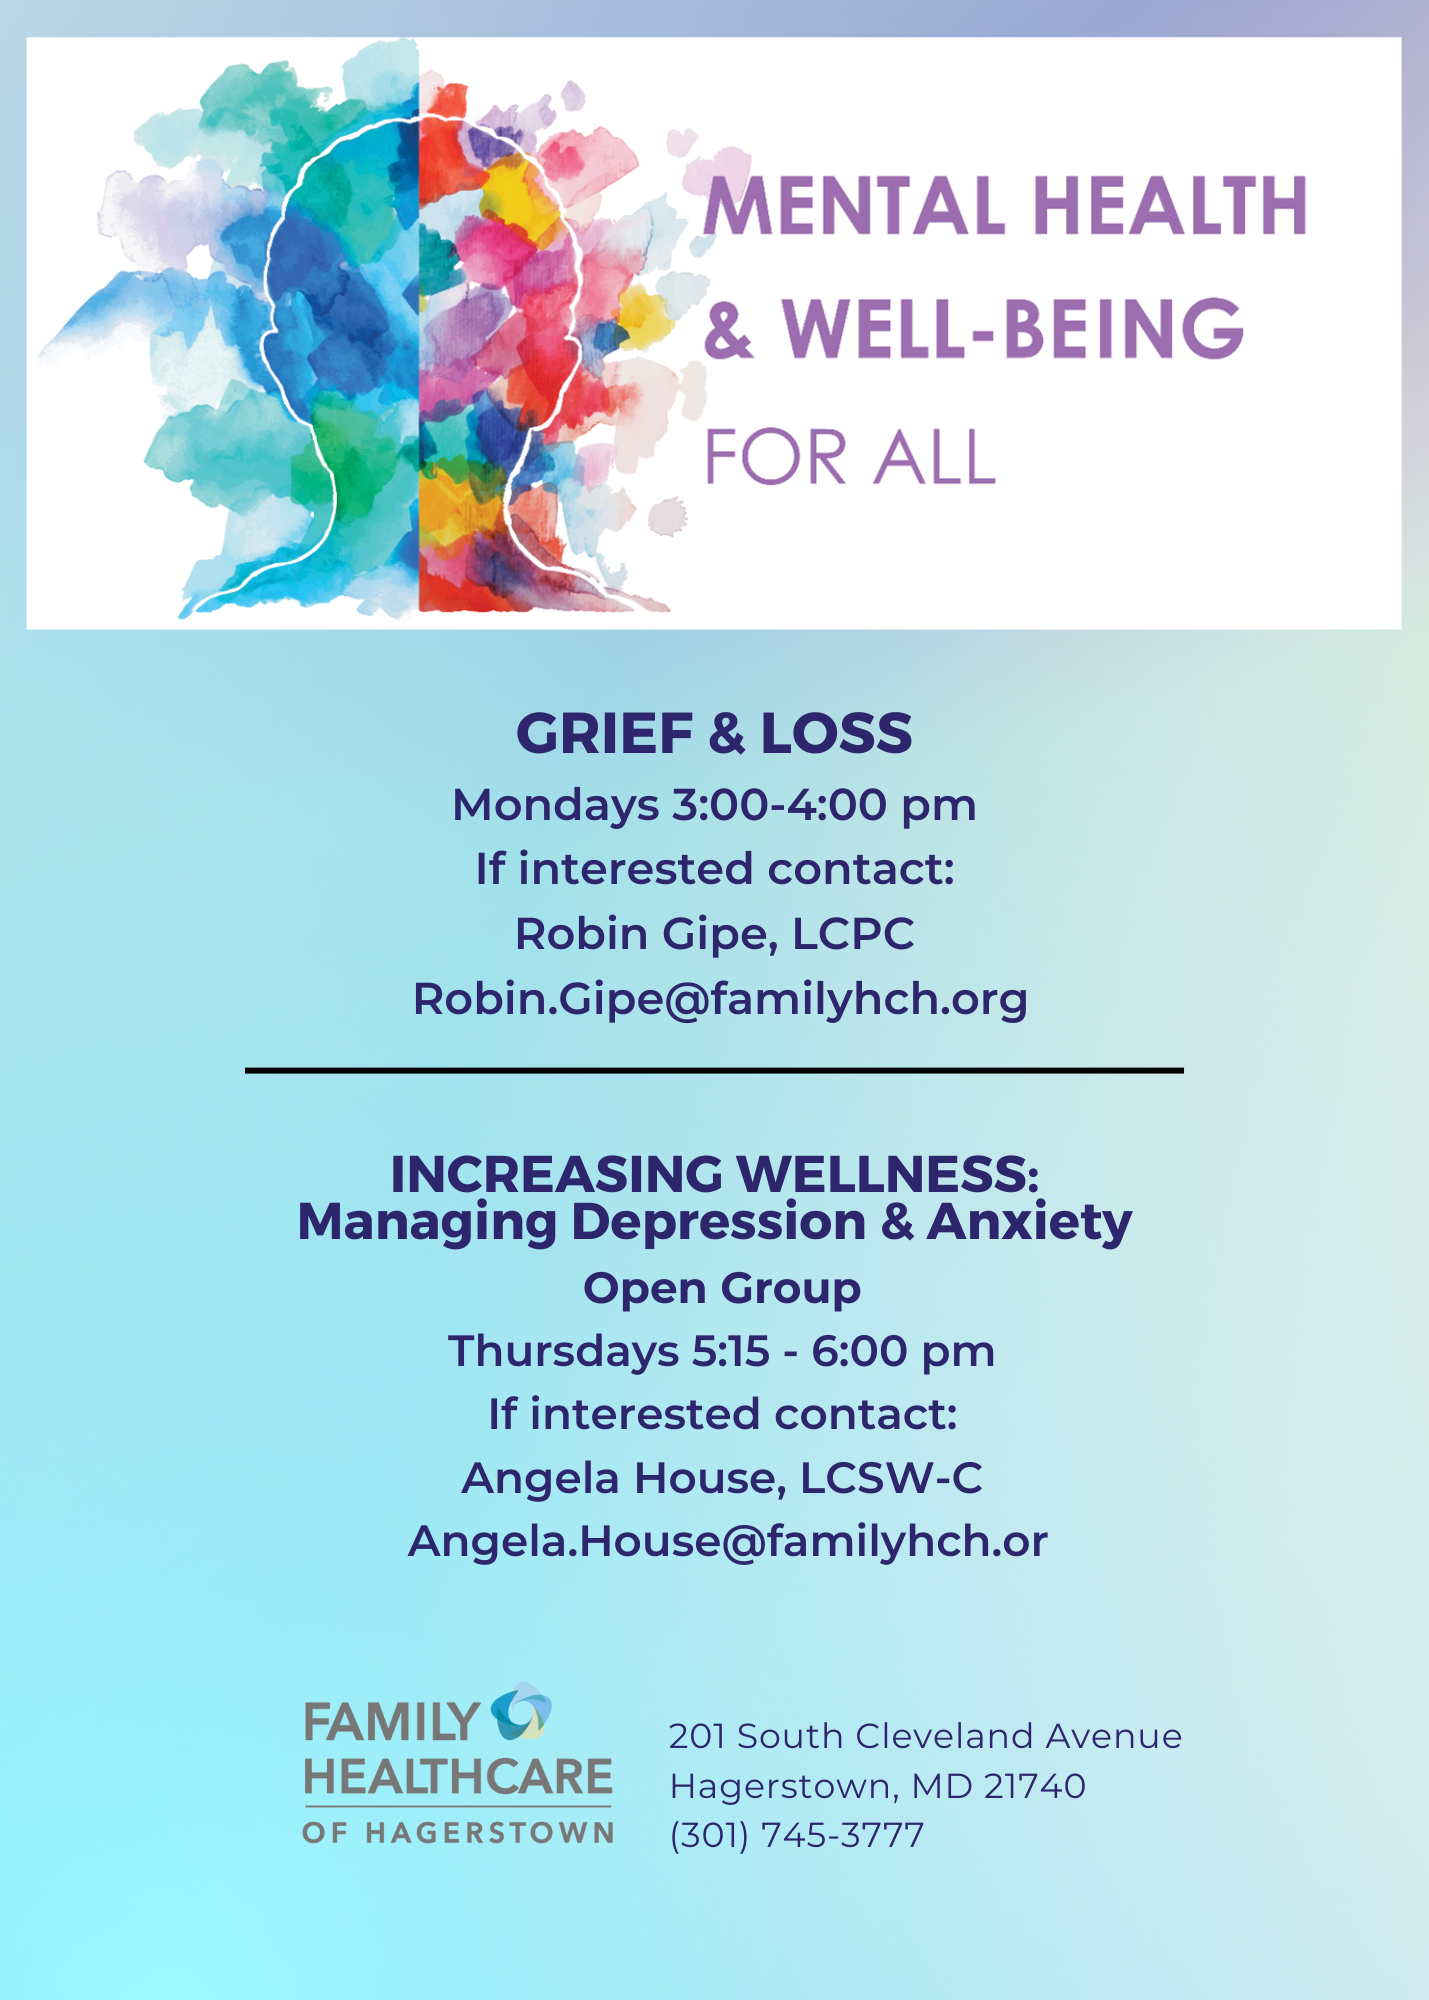 Mental Health & Well-Being at Family Healthcare of Hagerstown